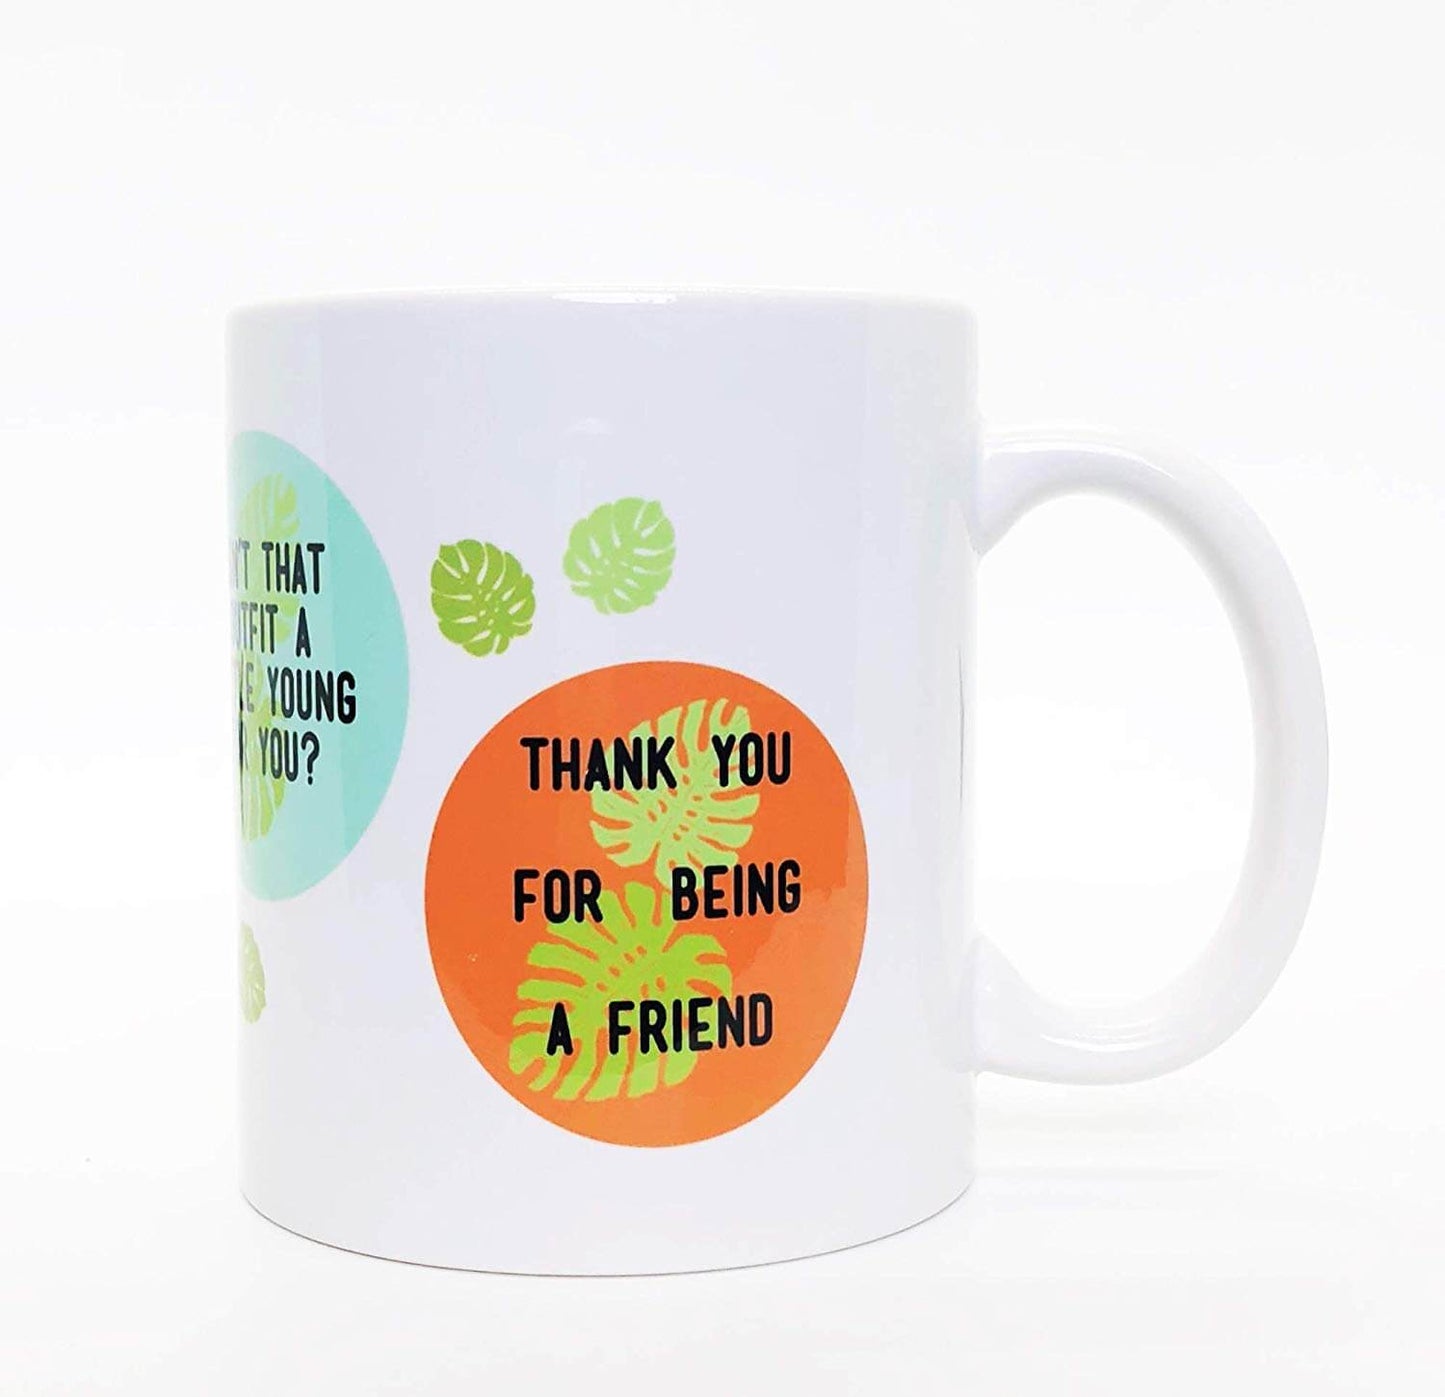 Brindle Southern Golden Girls Gift, Funny Golden Girls Coffee Mug: Sassy Quotes, Vintage Beachy Leaf Design - Thank You For Being A Friend, Cheesecake